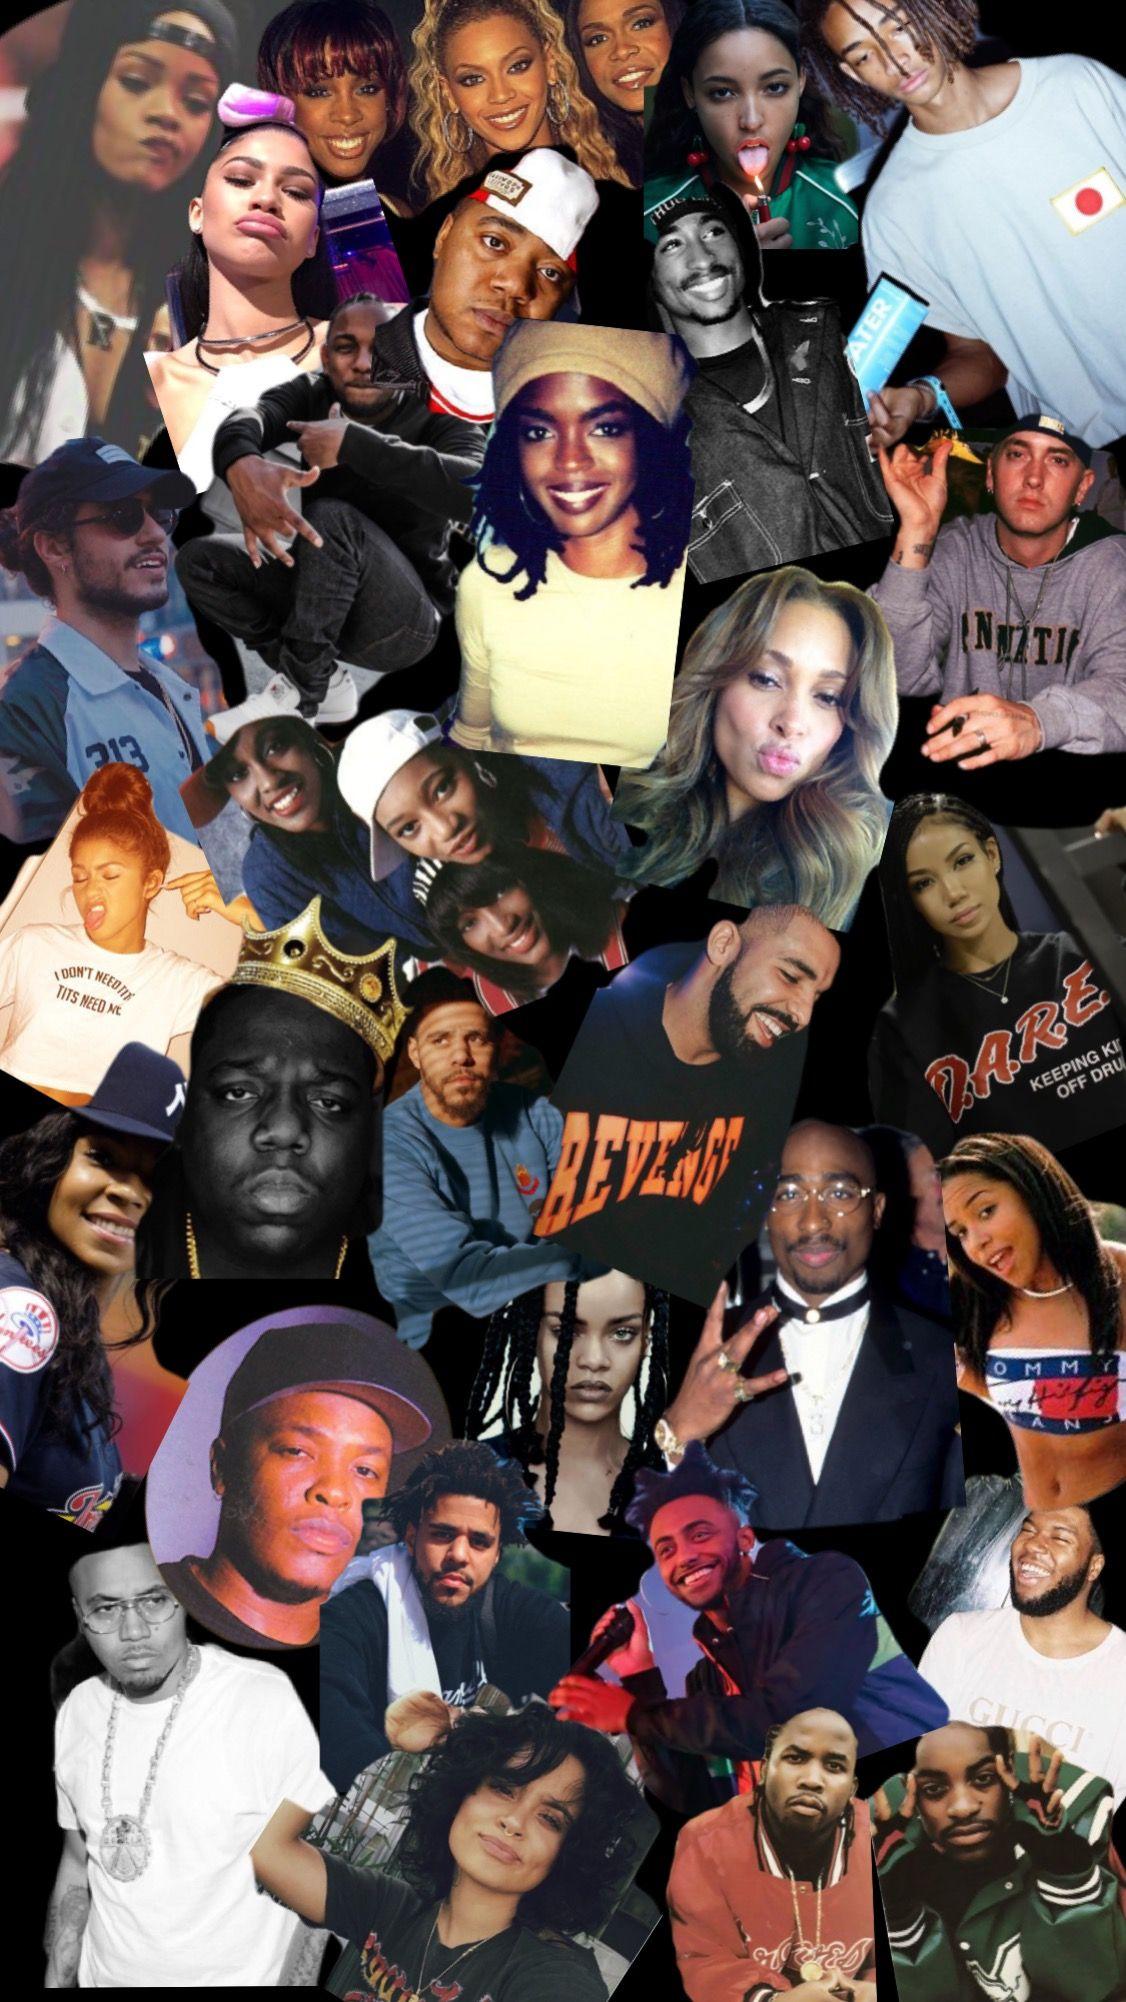 A collage of many different people in various poses - Chance the Rapper, Tupac, collage